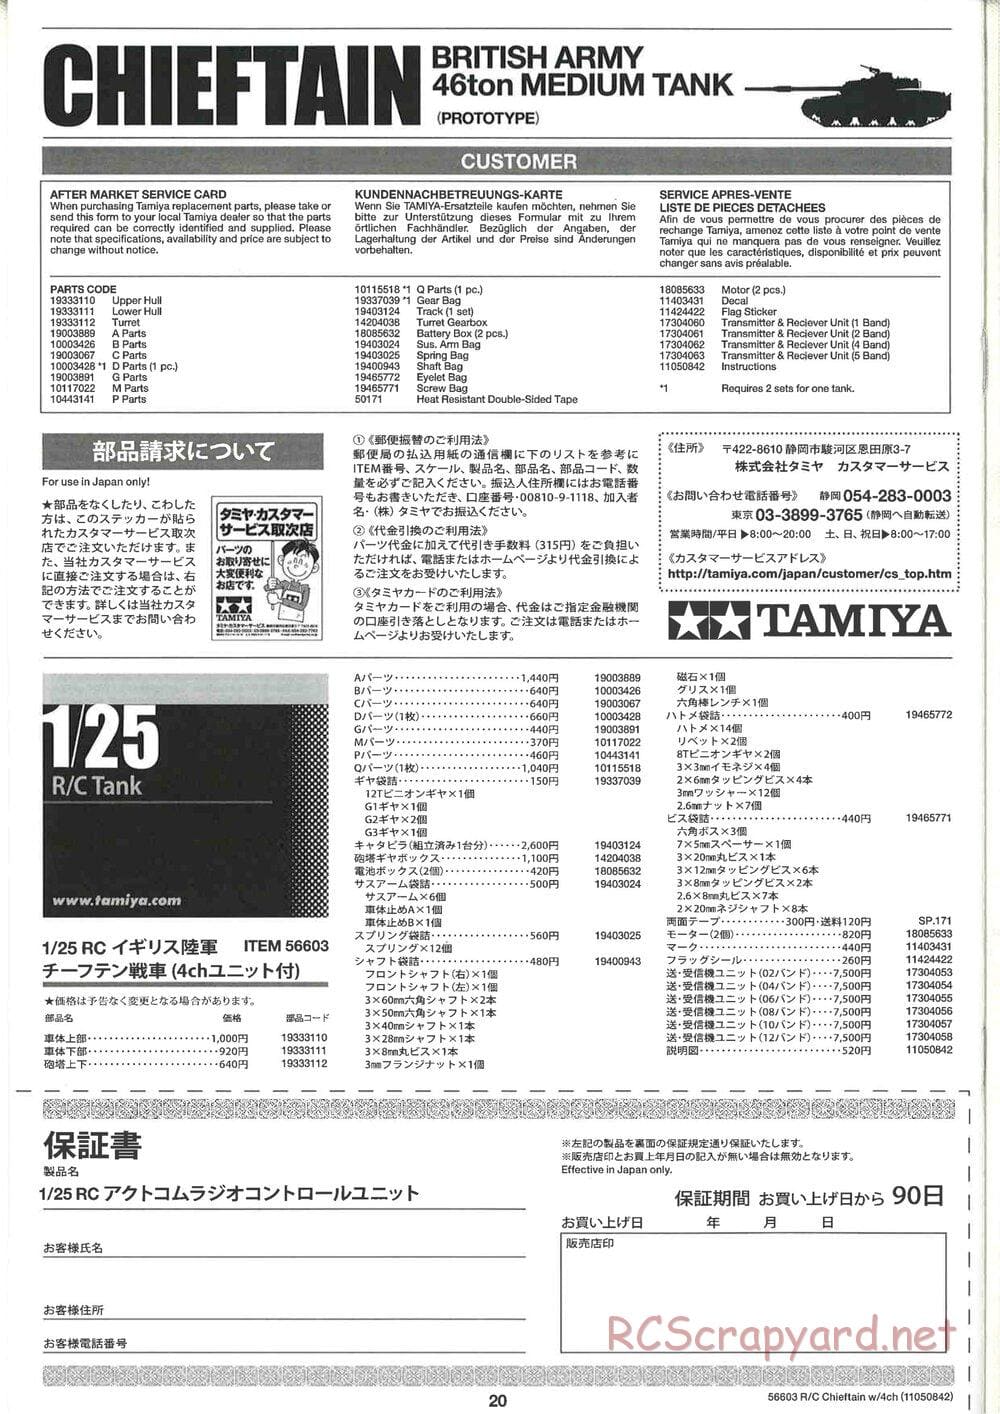 Tamiya - British Army Battle Tank Cheiftain - 1/25 Scale Chassis - Manual - Page 20